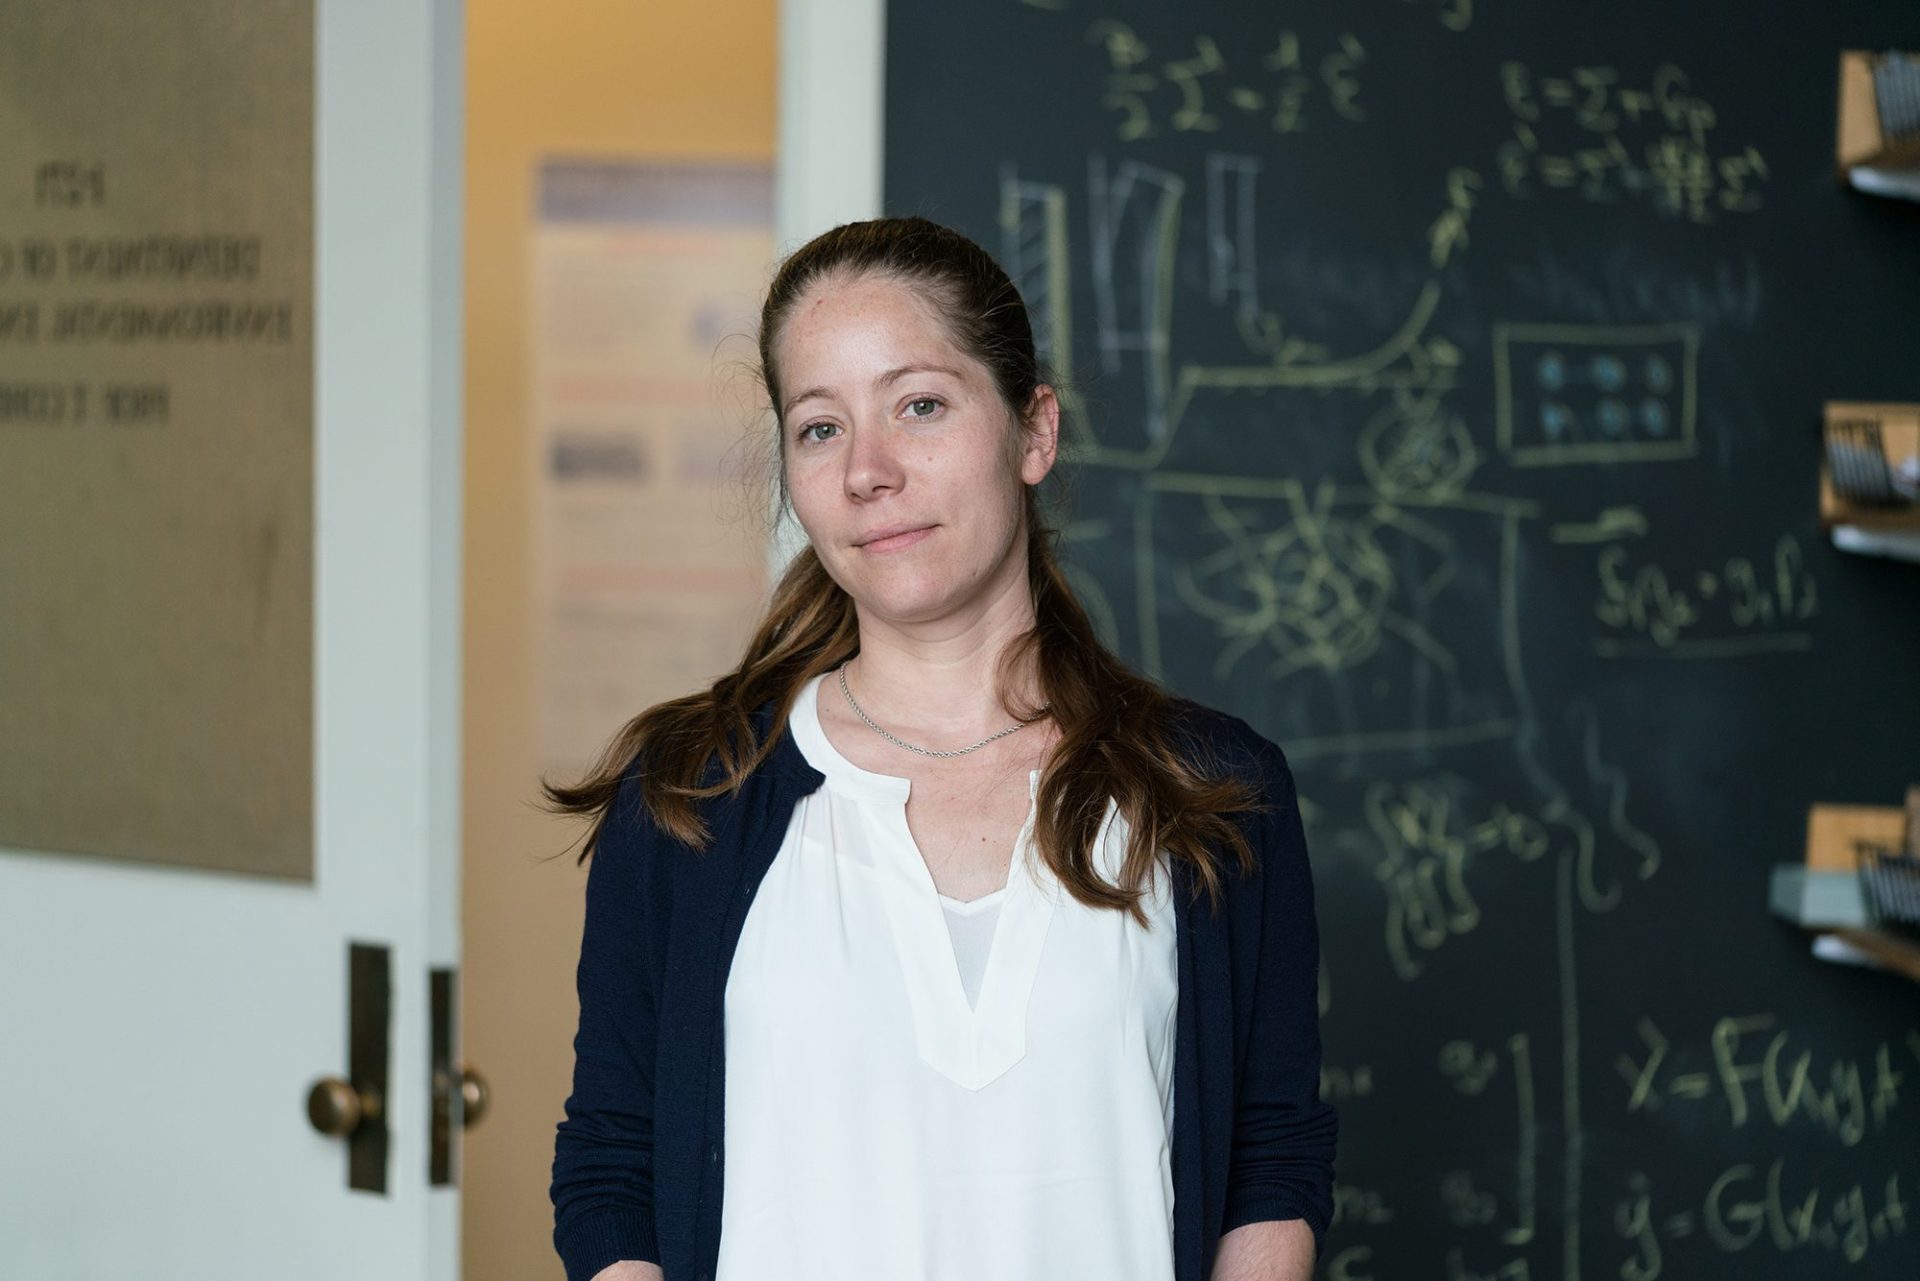 Prof. Cohen selected to receive Eshelby Mechanics Award for Young Faculty 